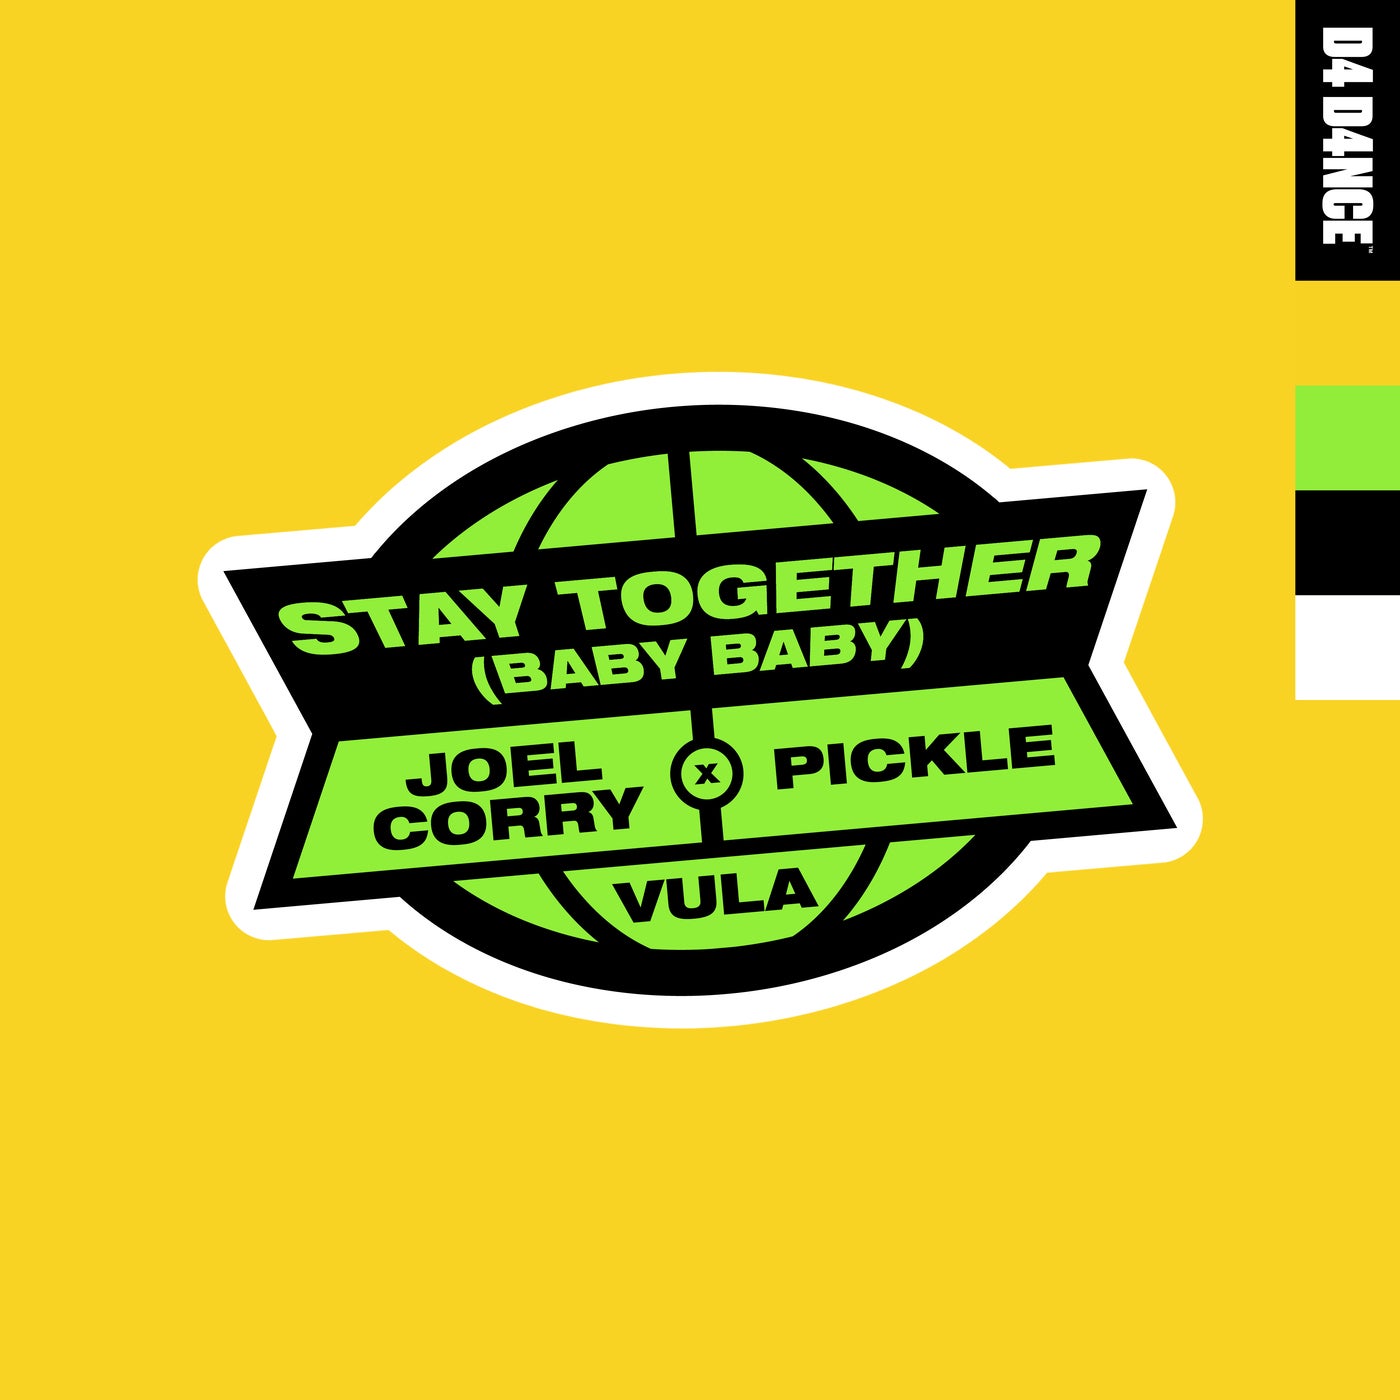 image cover: Vula, Pickle, Joel Corry - Stay Together (Baby Baby) - Extended Mix on D4 D4NCE